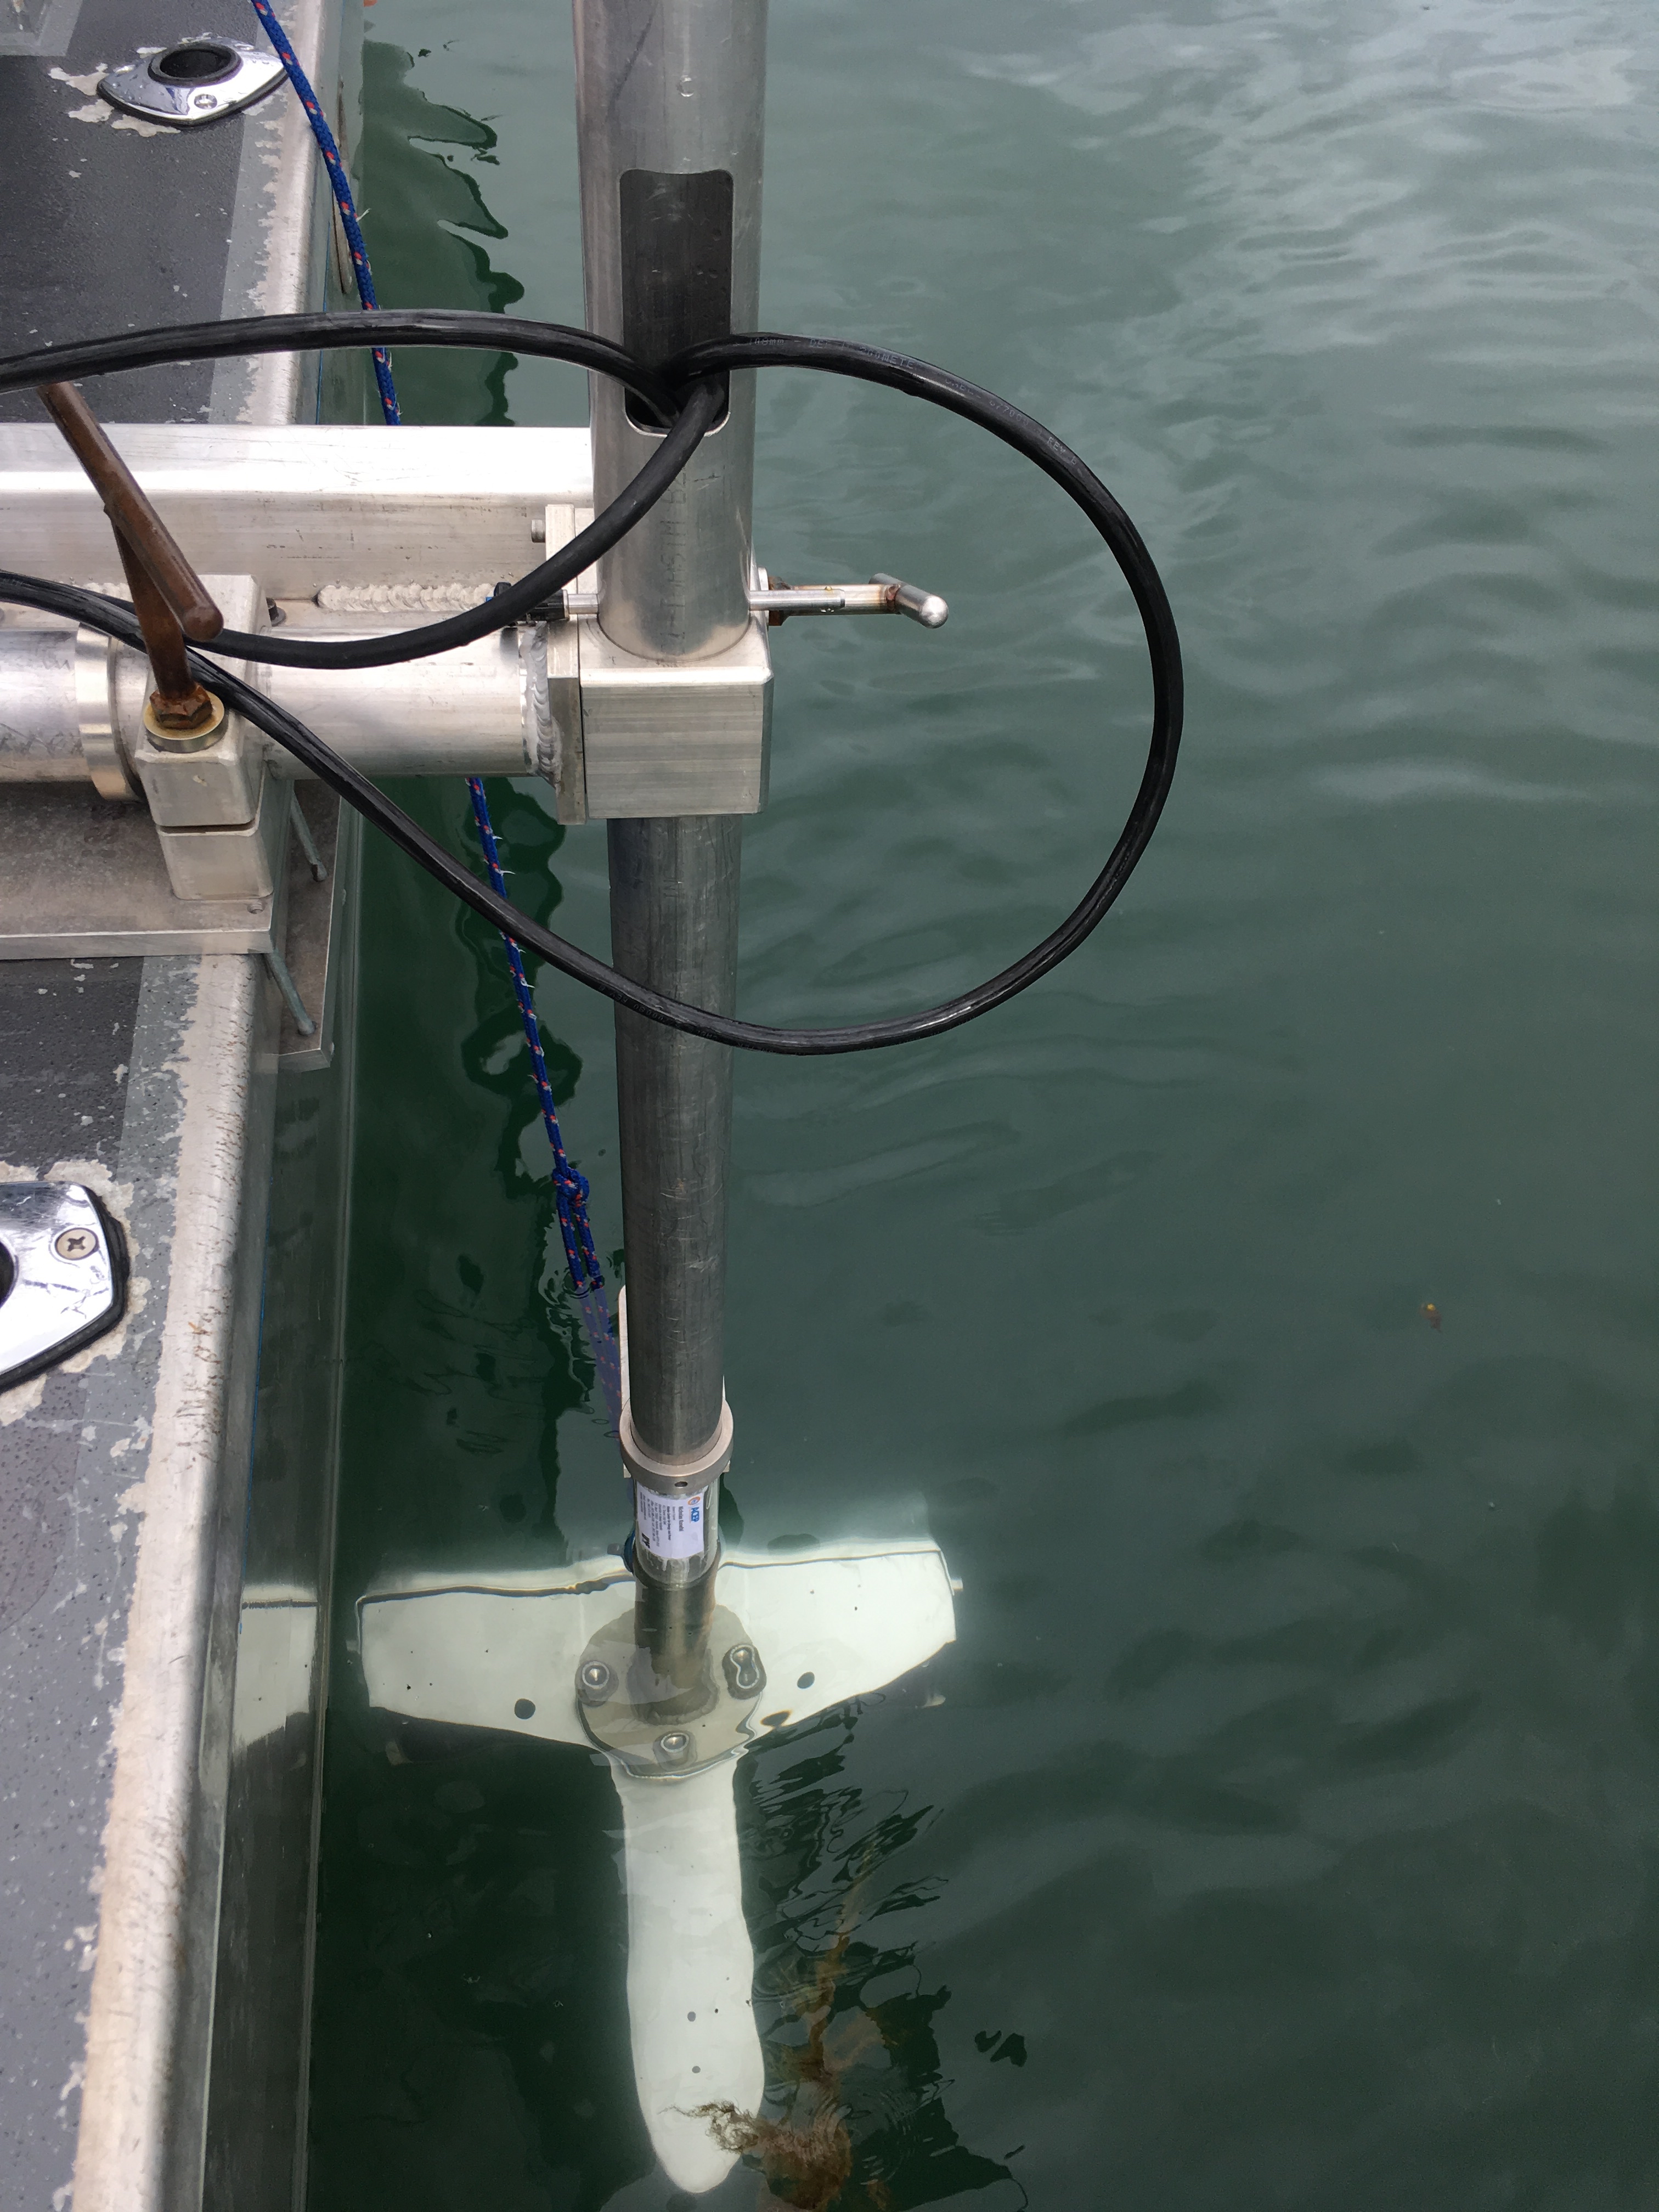 AHERC Researchers Attend Water Current Data Processing Workshop